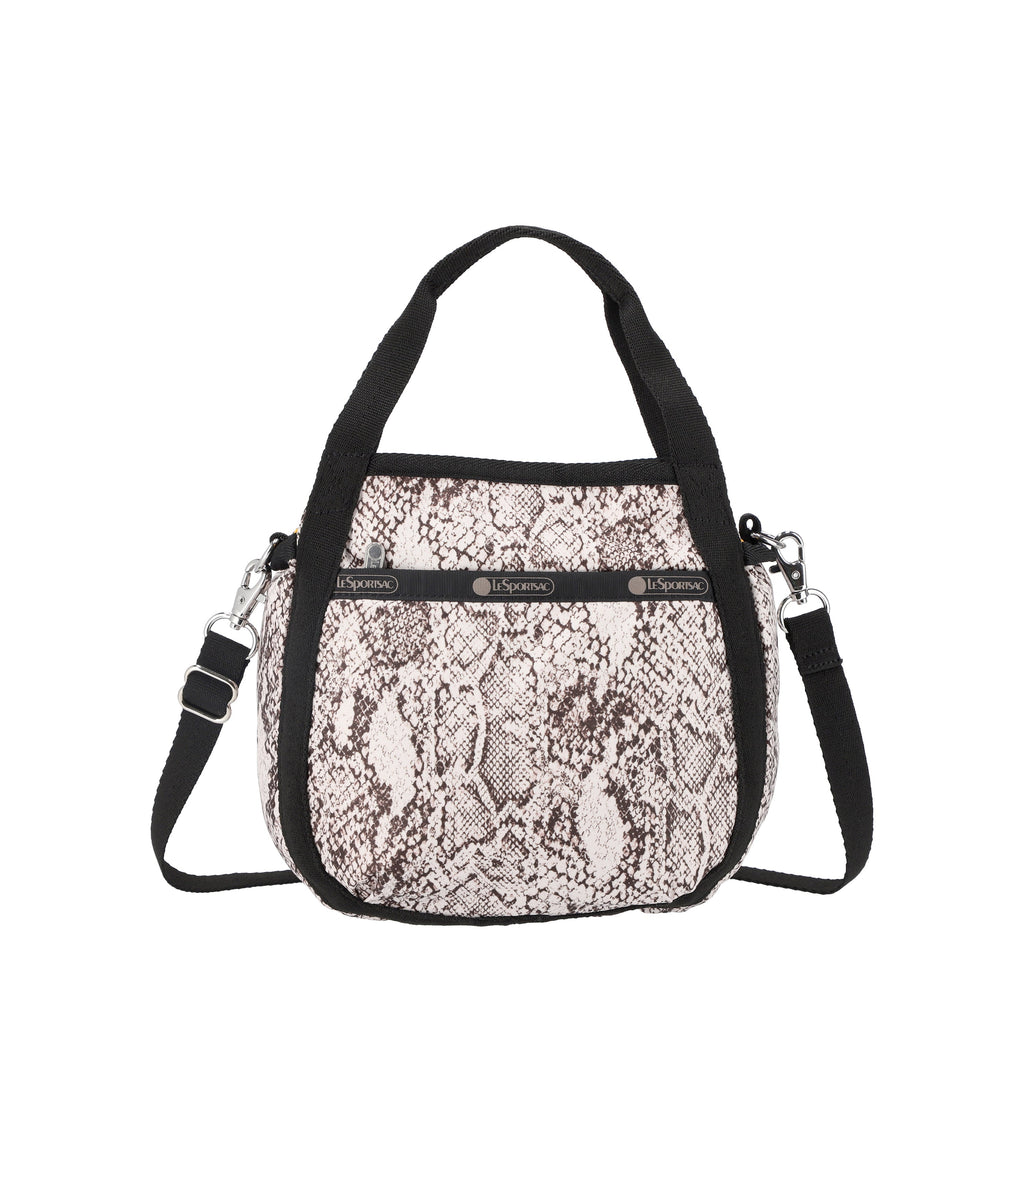 Replica Chanel Python Leather CF Classic Flap Bag Silvery 27